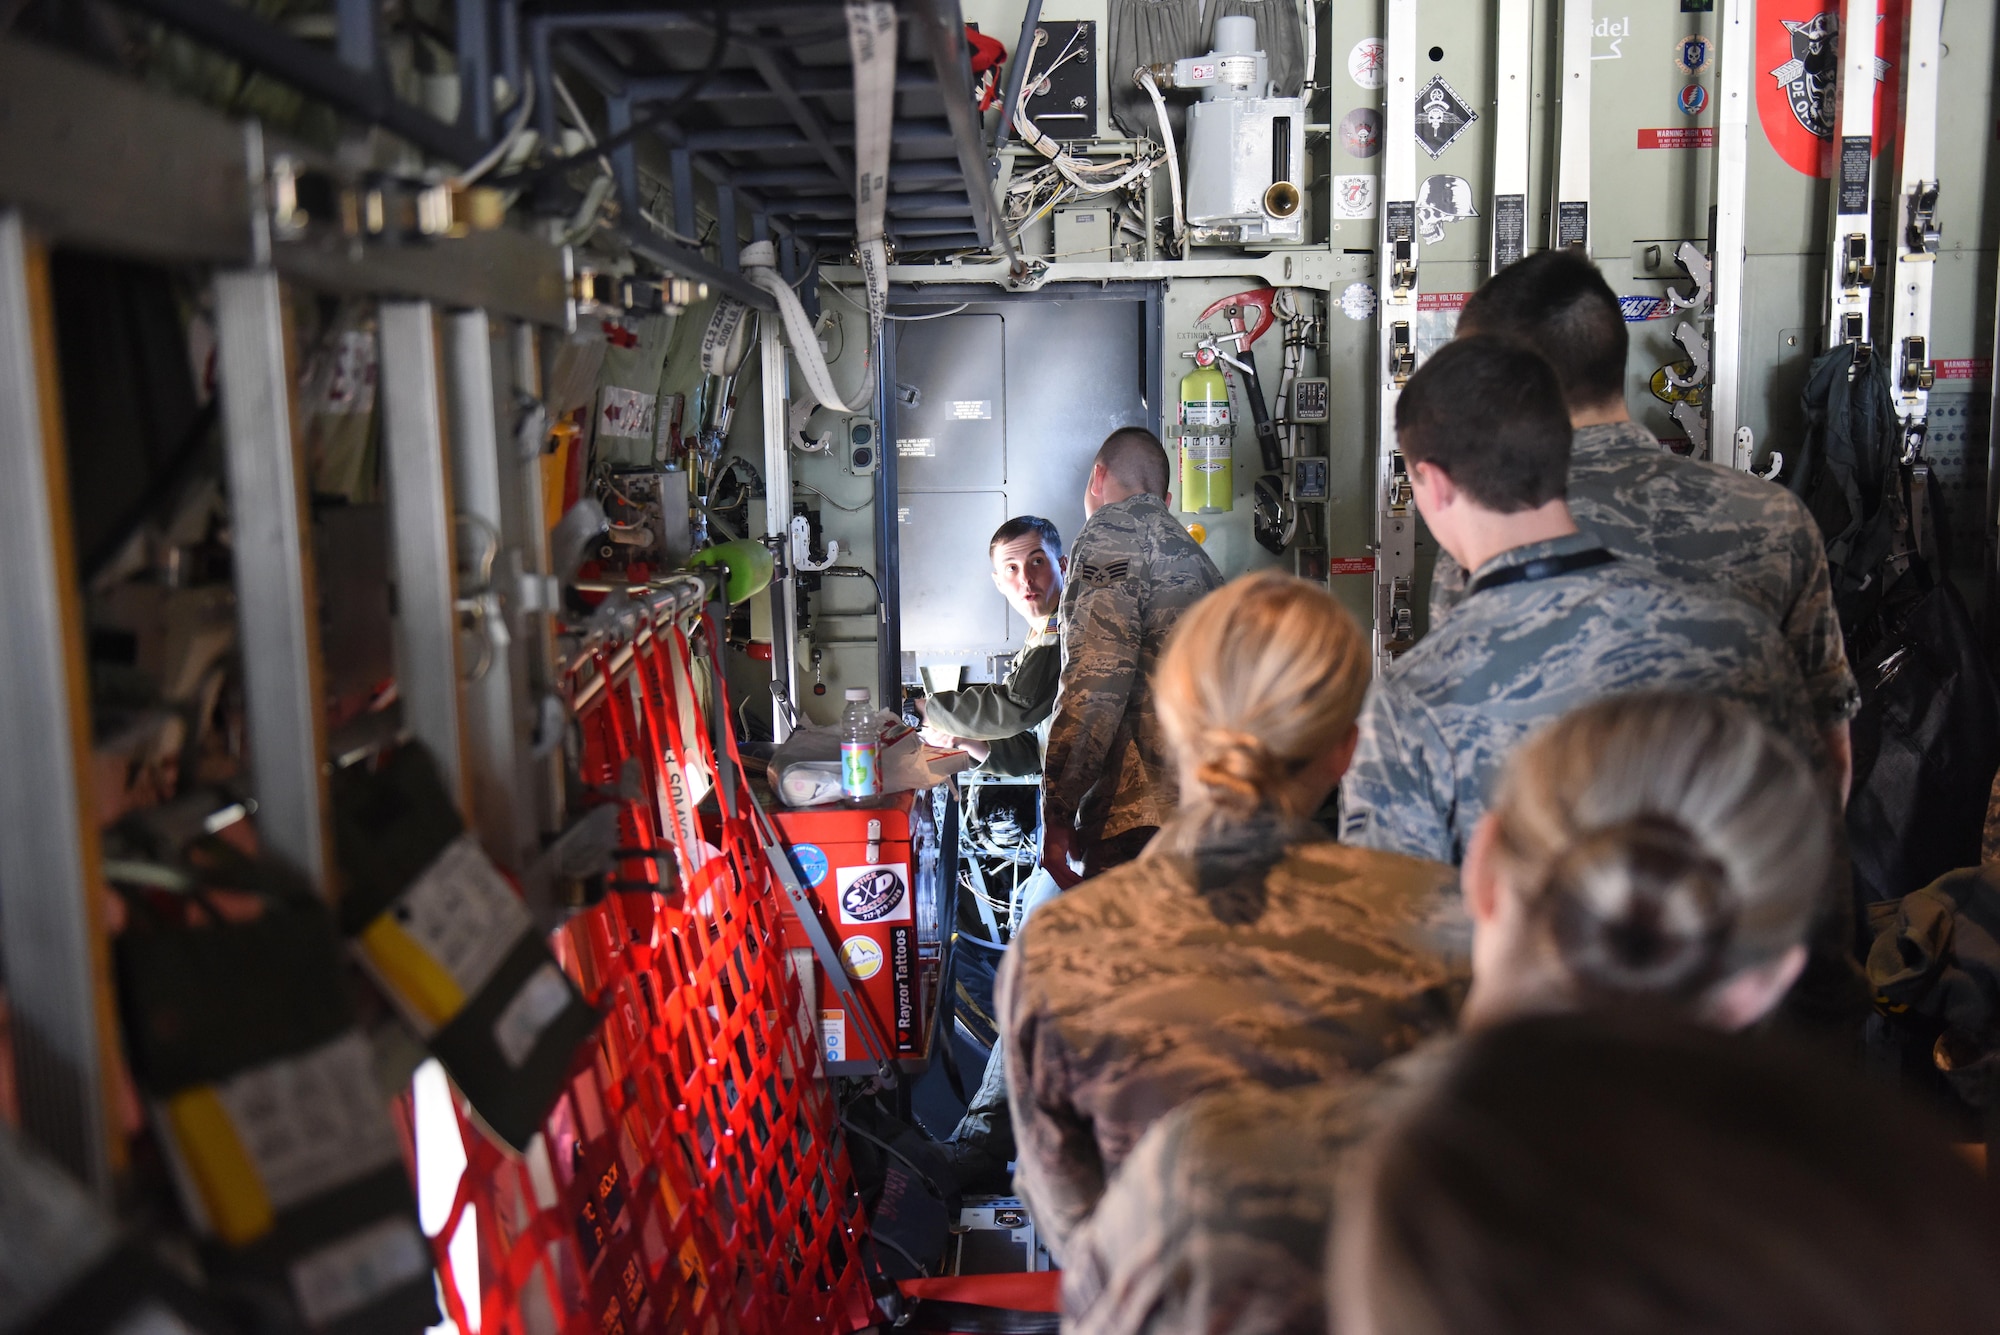 Senior Airman Ryan Dunkle, a loadmaster at the 193rd Special Operations Wing, Middletown, Pennsylvania, demonstrates and explains safety procedures to Airmen participating in the incentive flight prior to the departure of the EC-130J aircraft, April 9, 2017. According to incentive flight program regulations, guard members can be nominated by their supervisors to participate in an upcoming incentive flight.